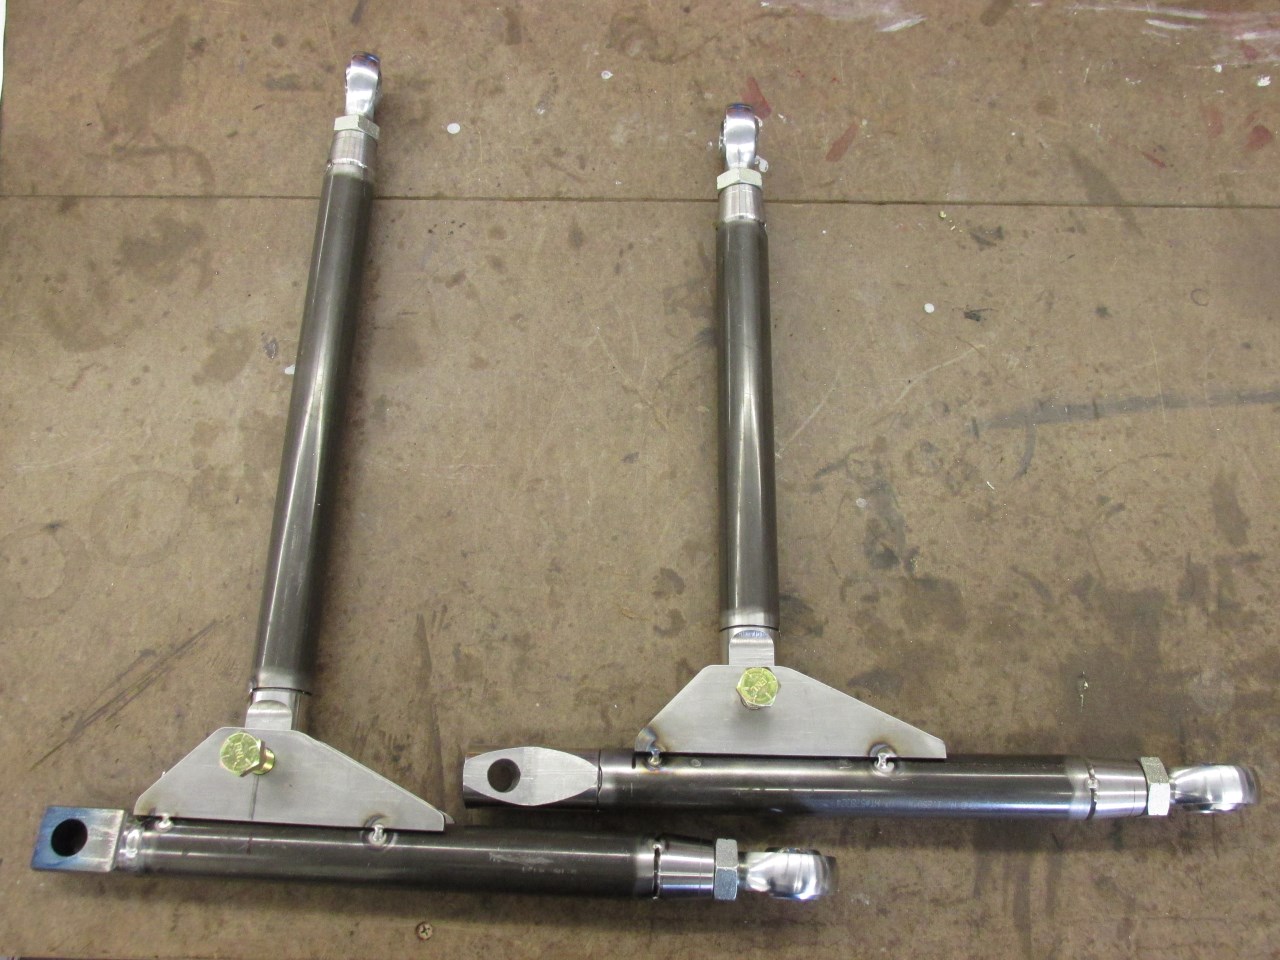 Tack welded control arms